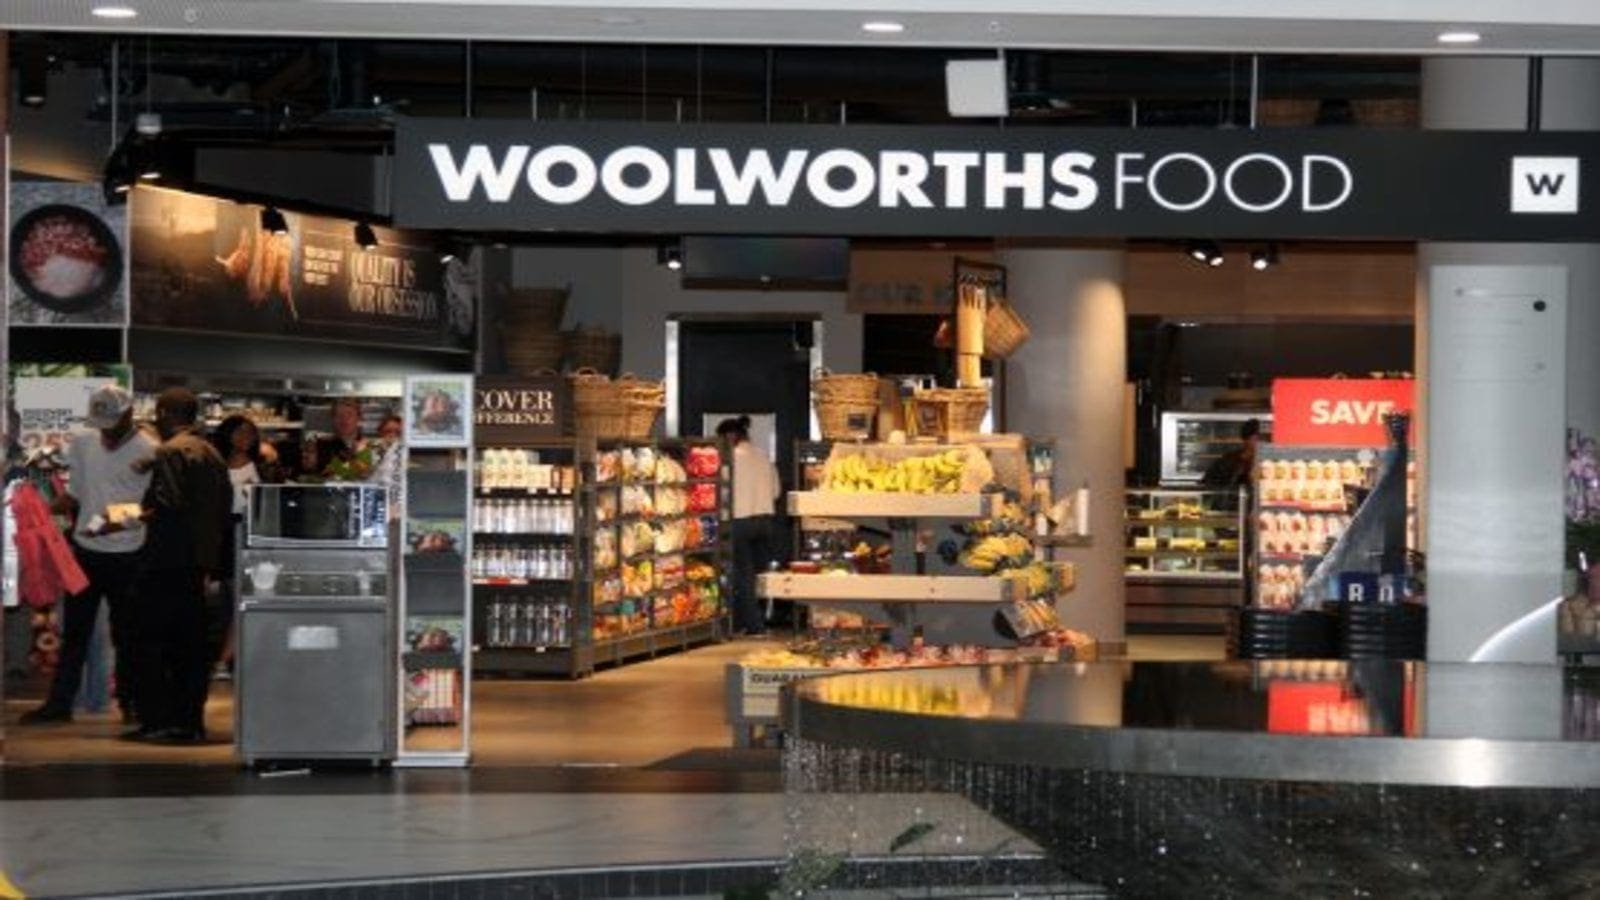 Woolworths sets new sustainability goal, receive financial backing from Standard Bank